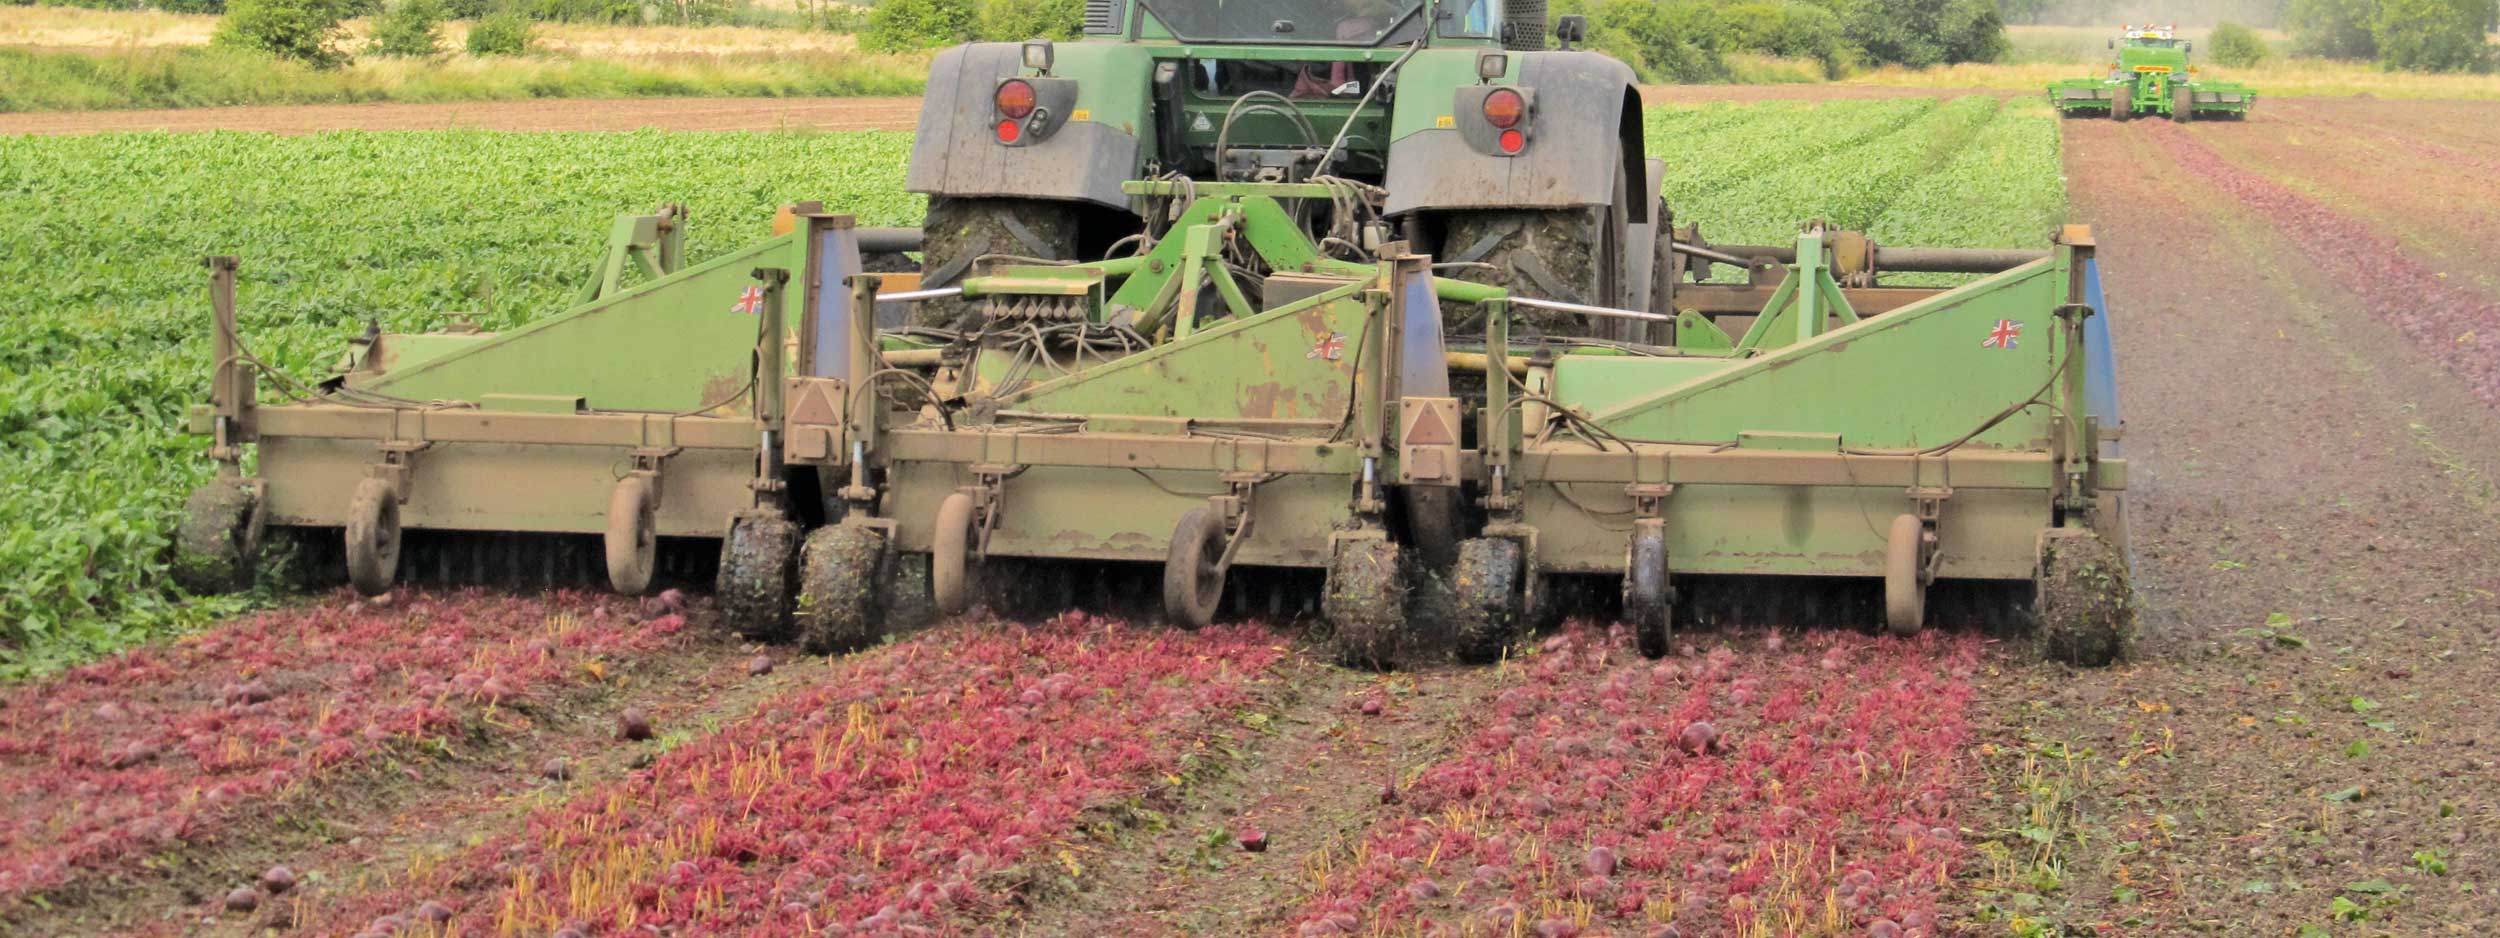 Beetrook UK provide quality beetroot to Britain and the European market